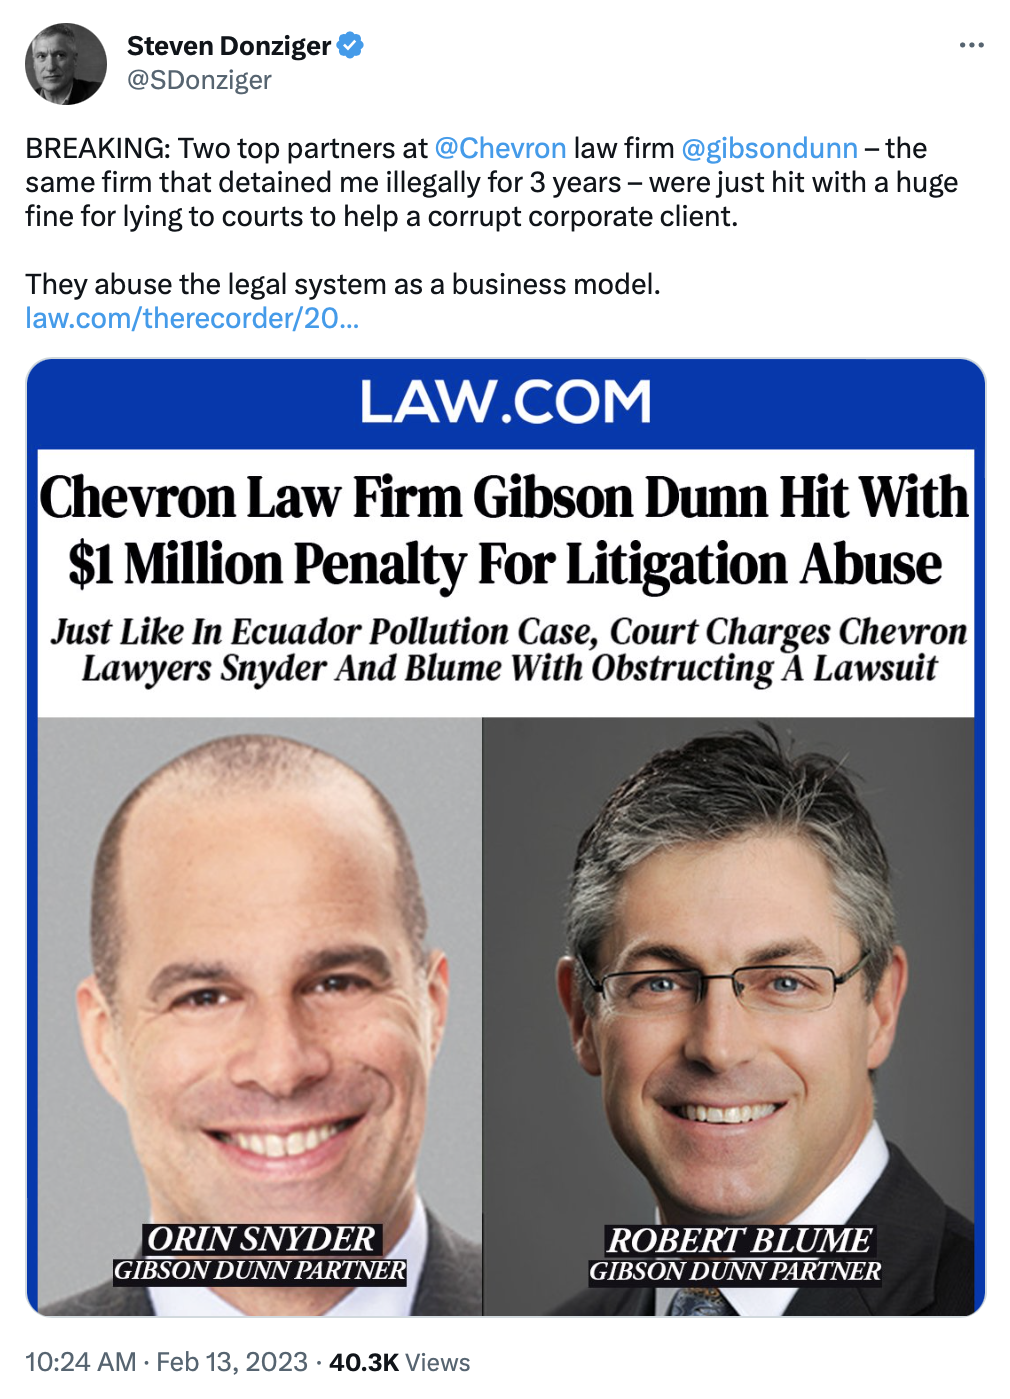 BREAKING: Two top partners at  @Chevron  law firm  @gibsondunn  – the same firm that detained me illegally for 3 years – were just hit with a huge fine for lying to courts to help a corrupt corporate client.   They abuse the legal system as a business model.